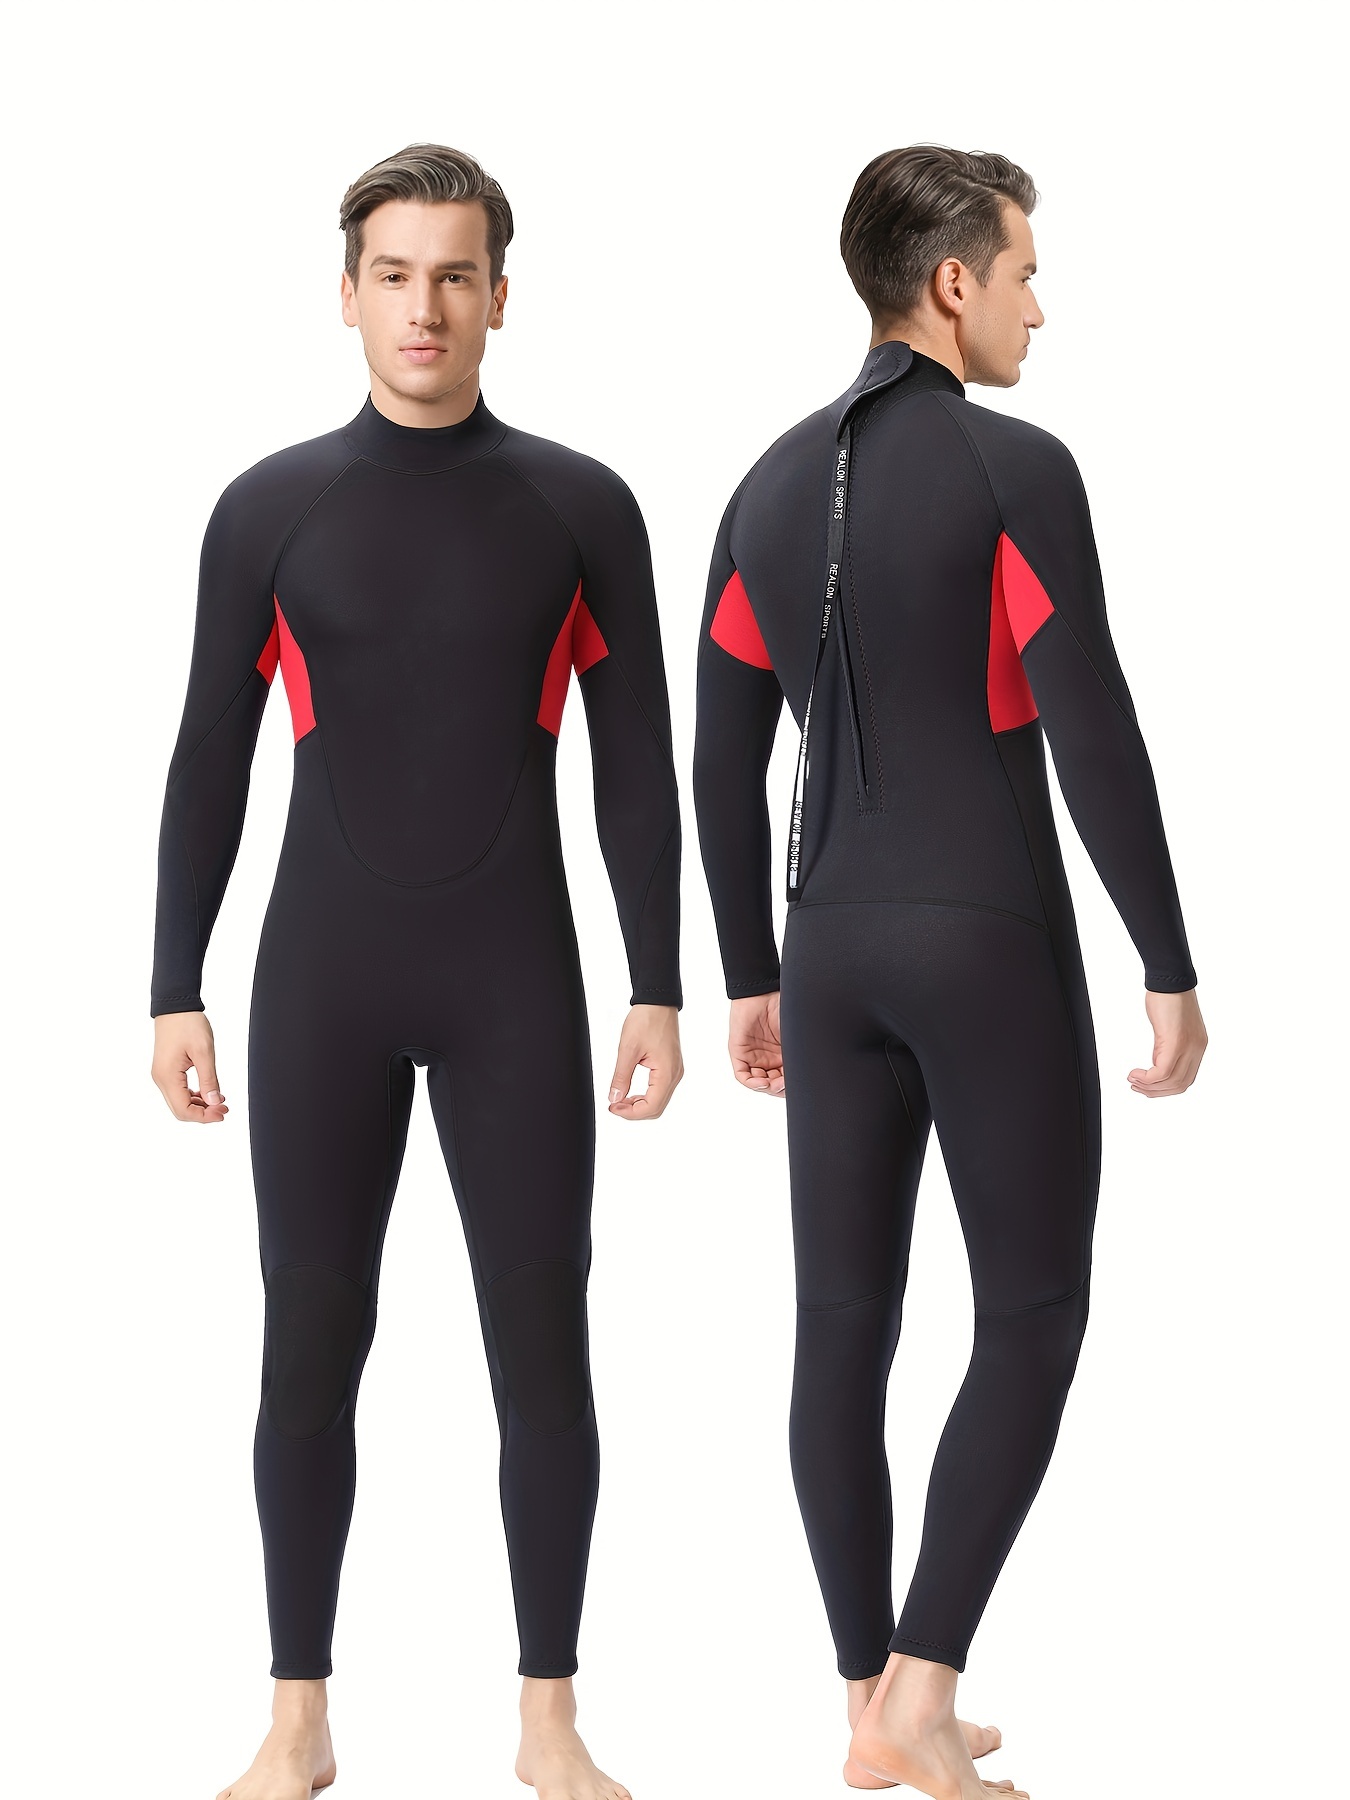 Wetsuit Men Scuba Diving Thermal Warm Wetsuits Swimming Body Full